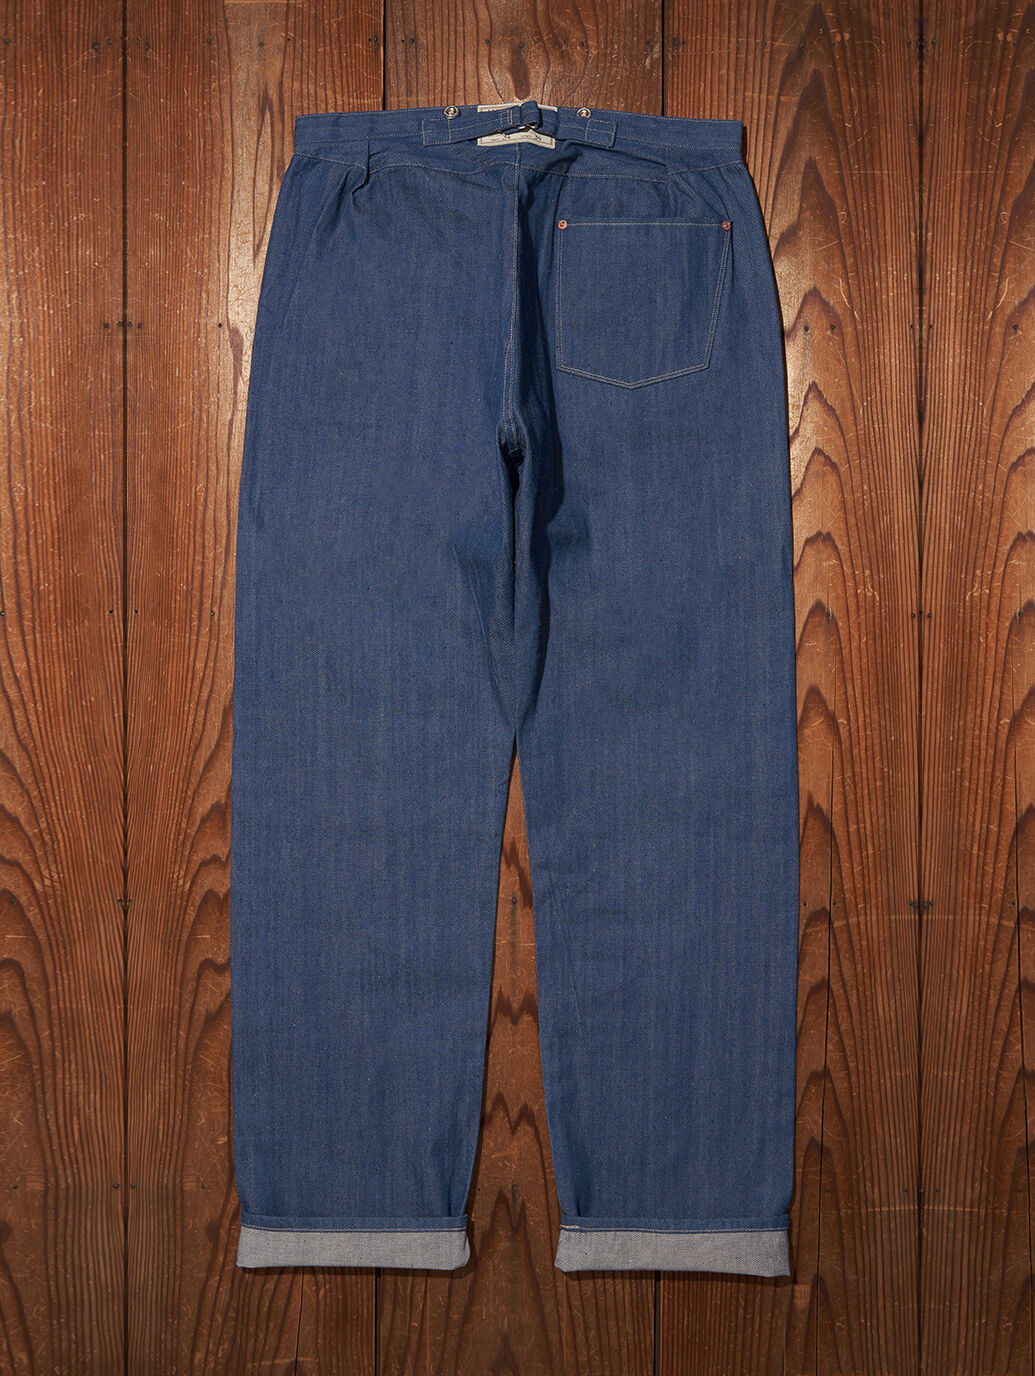 LIMITED EDITION LEVI'S® VINTAGE CLOTHING1873 XX Waist Overall ...